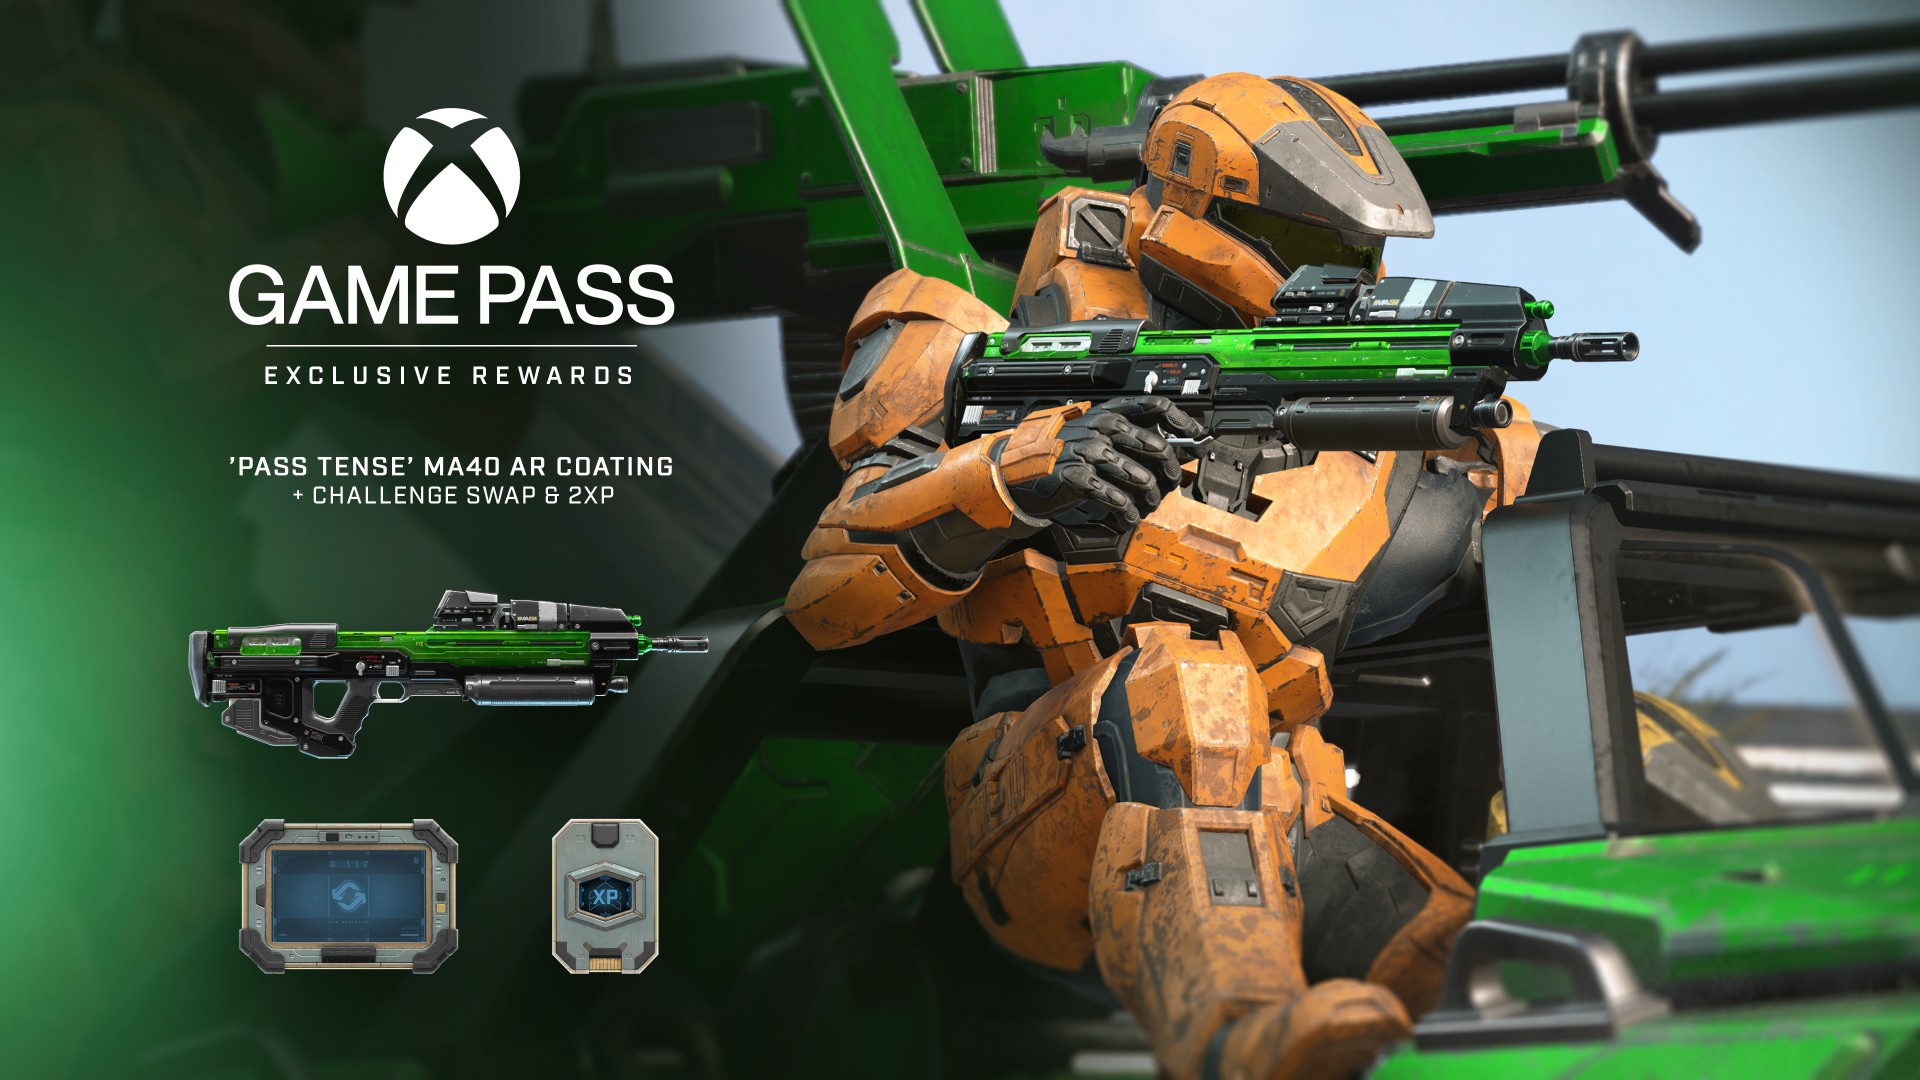 Xbox Game Pass Ultimate Perks for March 2023 Include One of the